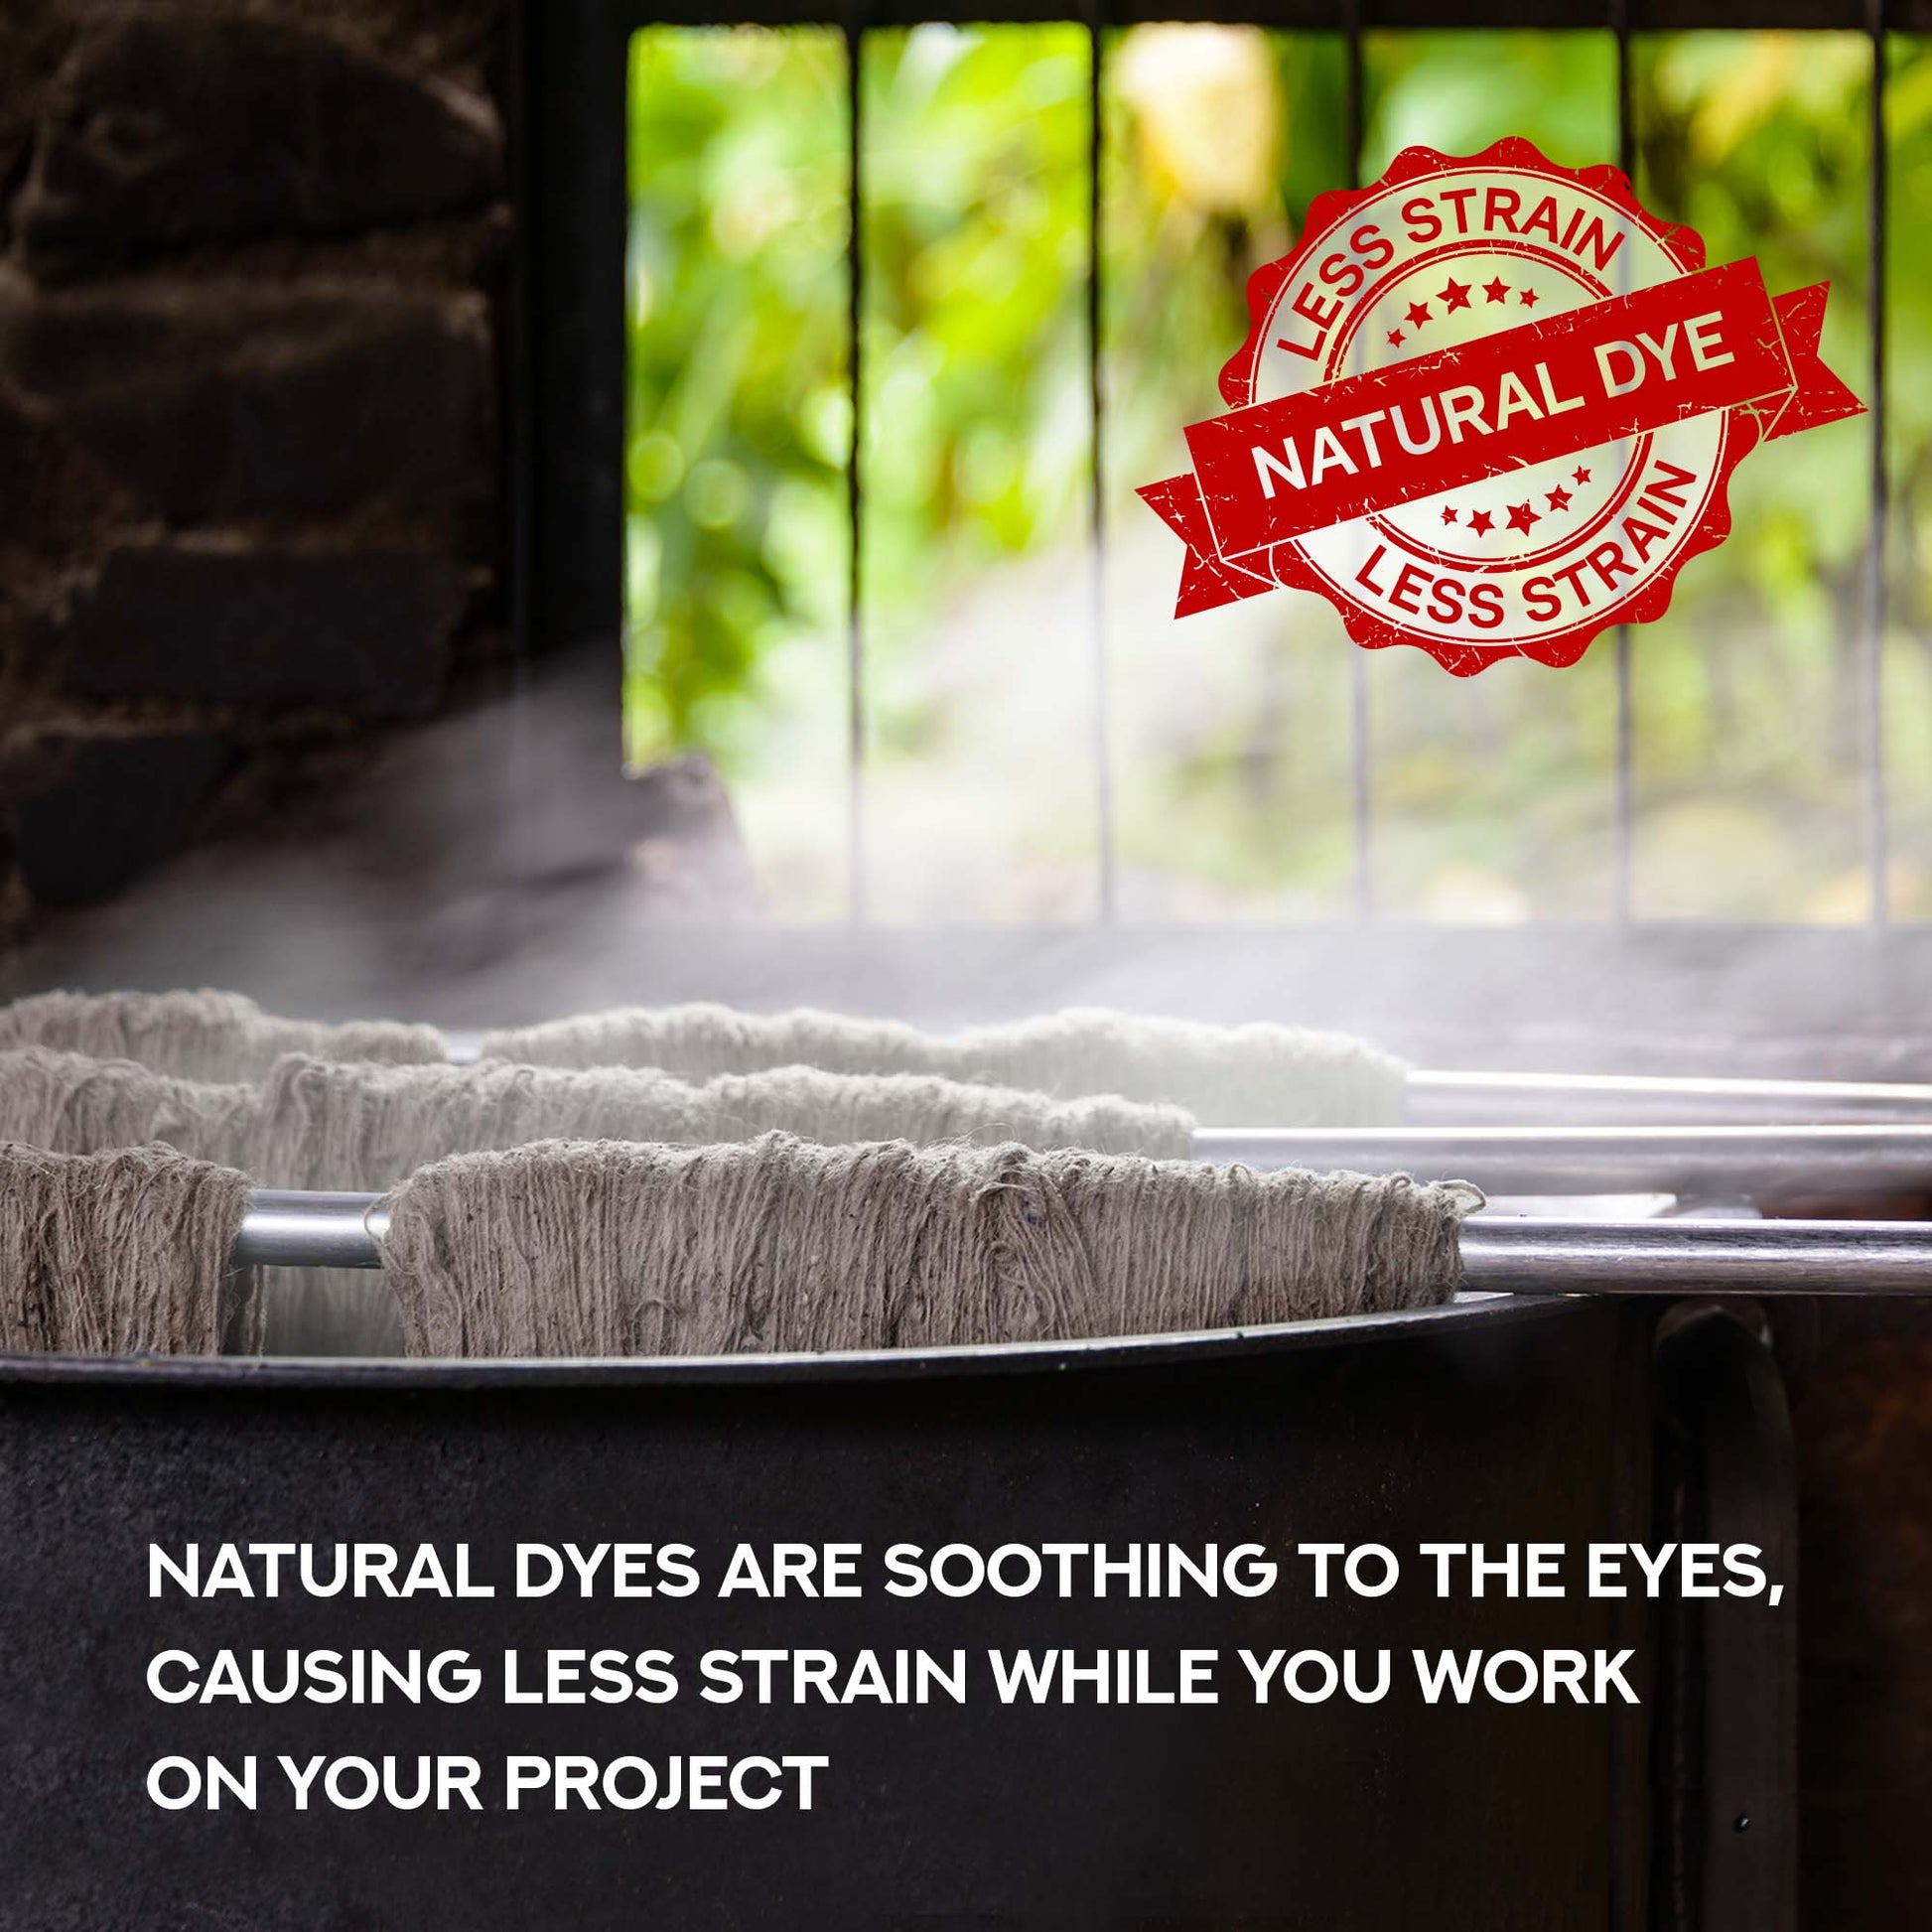 Natural dyes are soothing to the eyes, causing less strain while you work on your project